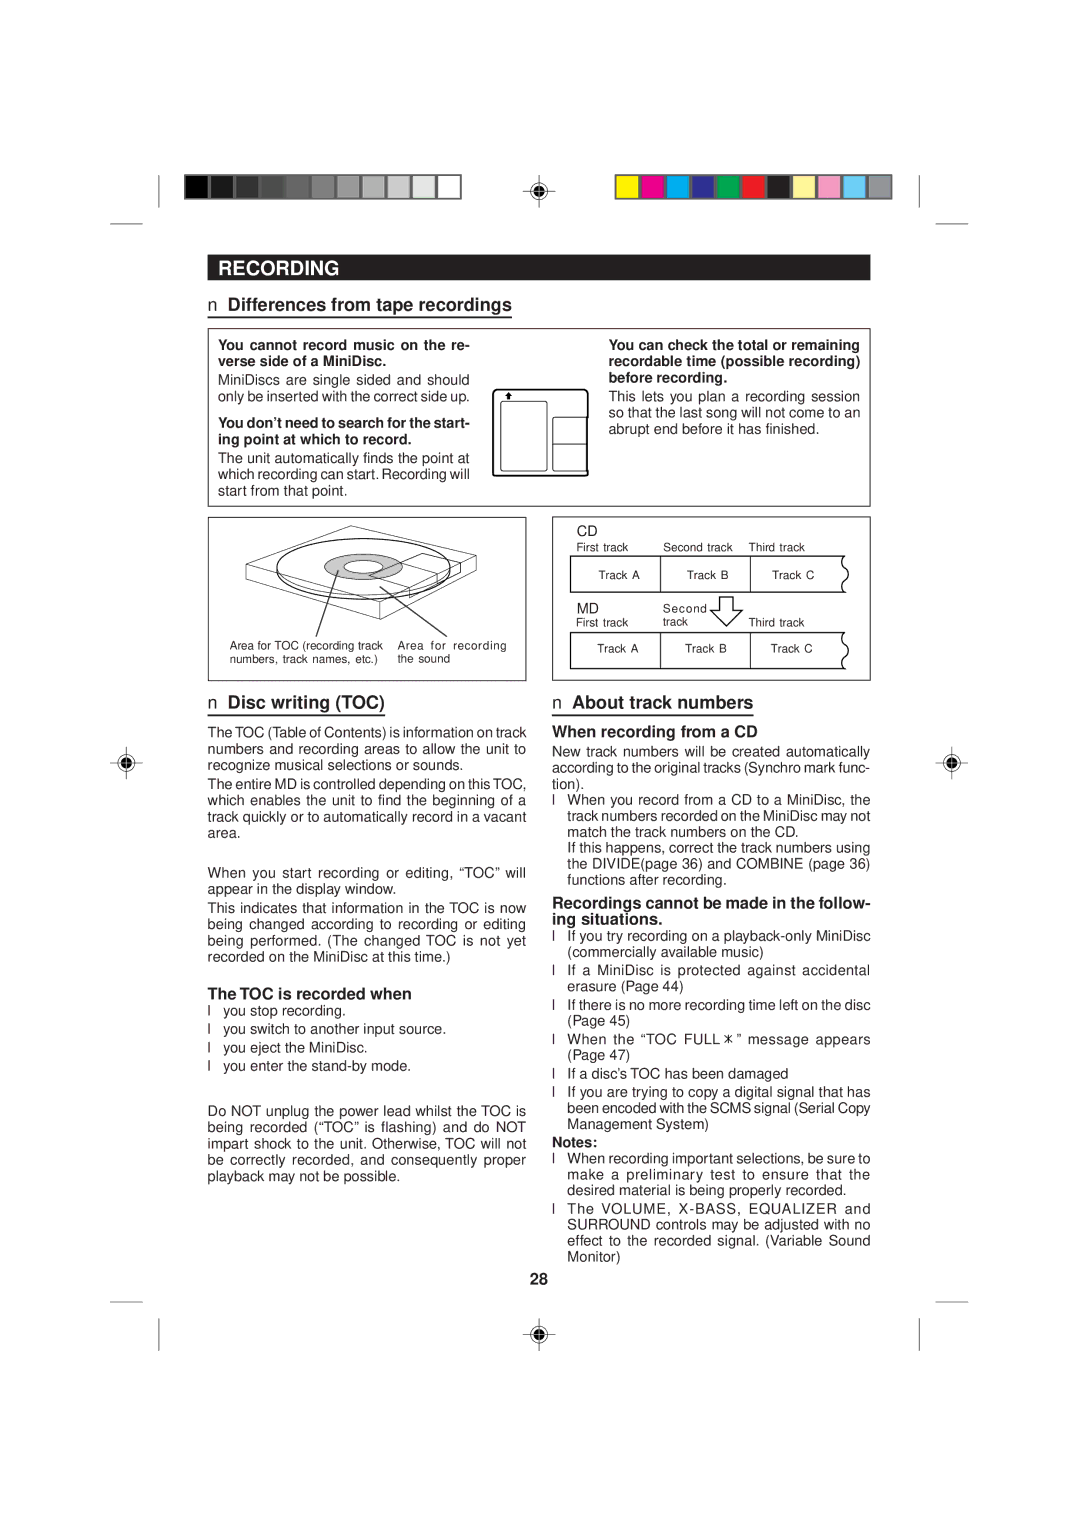 Sharp MD-M2H operation manual Recording, Differences from tape recordings, Disc writing TOC, About track numbers 